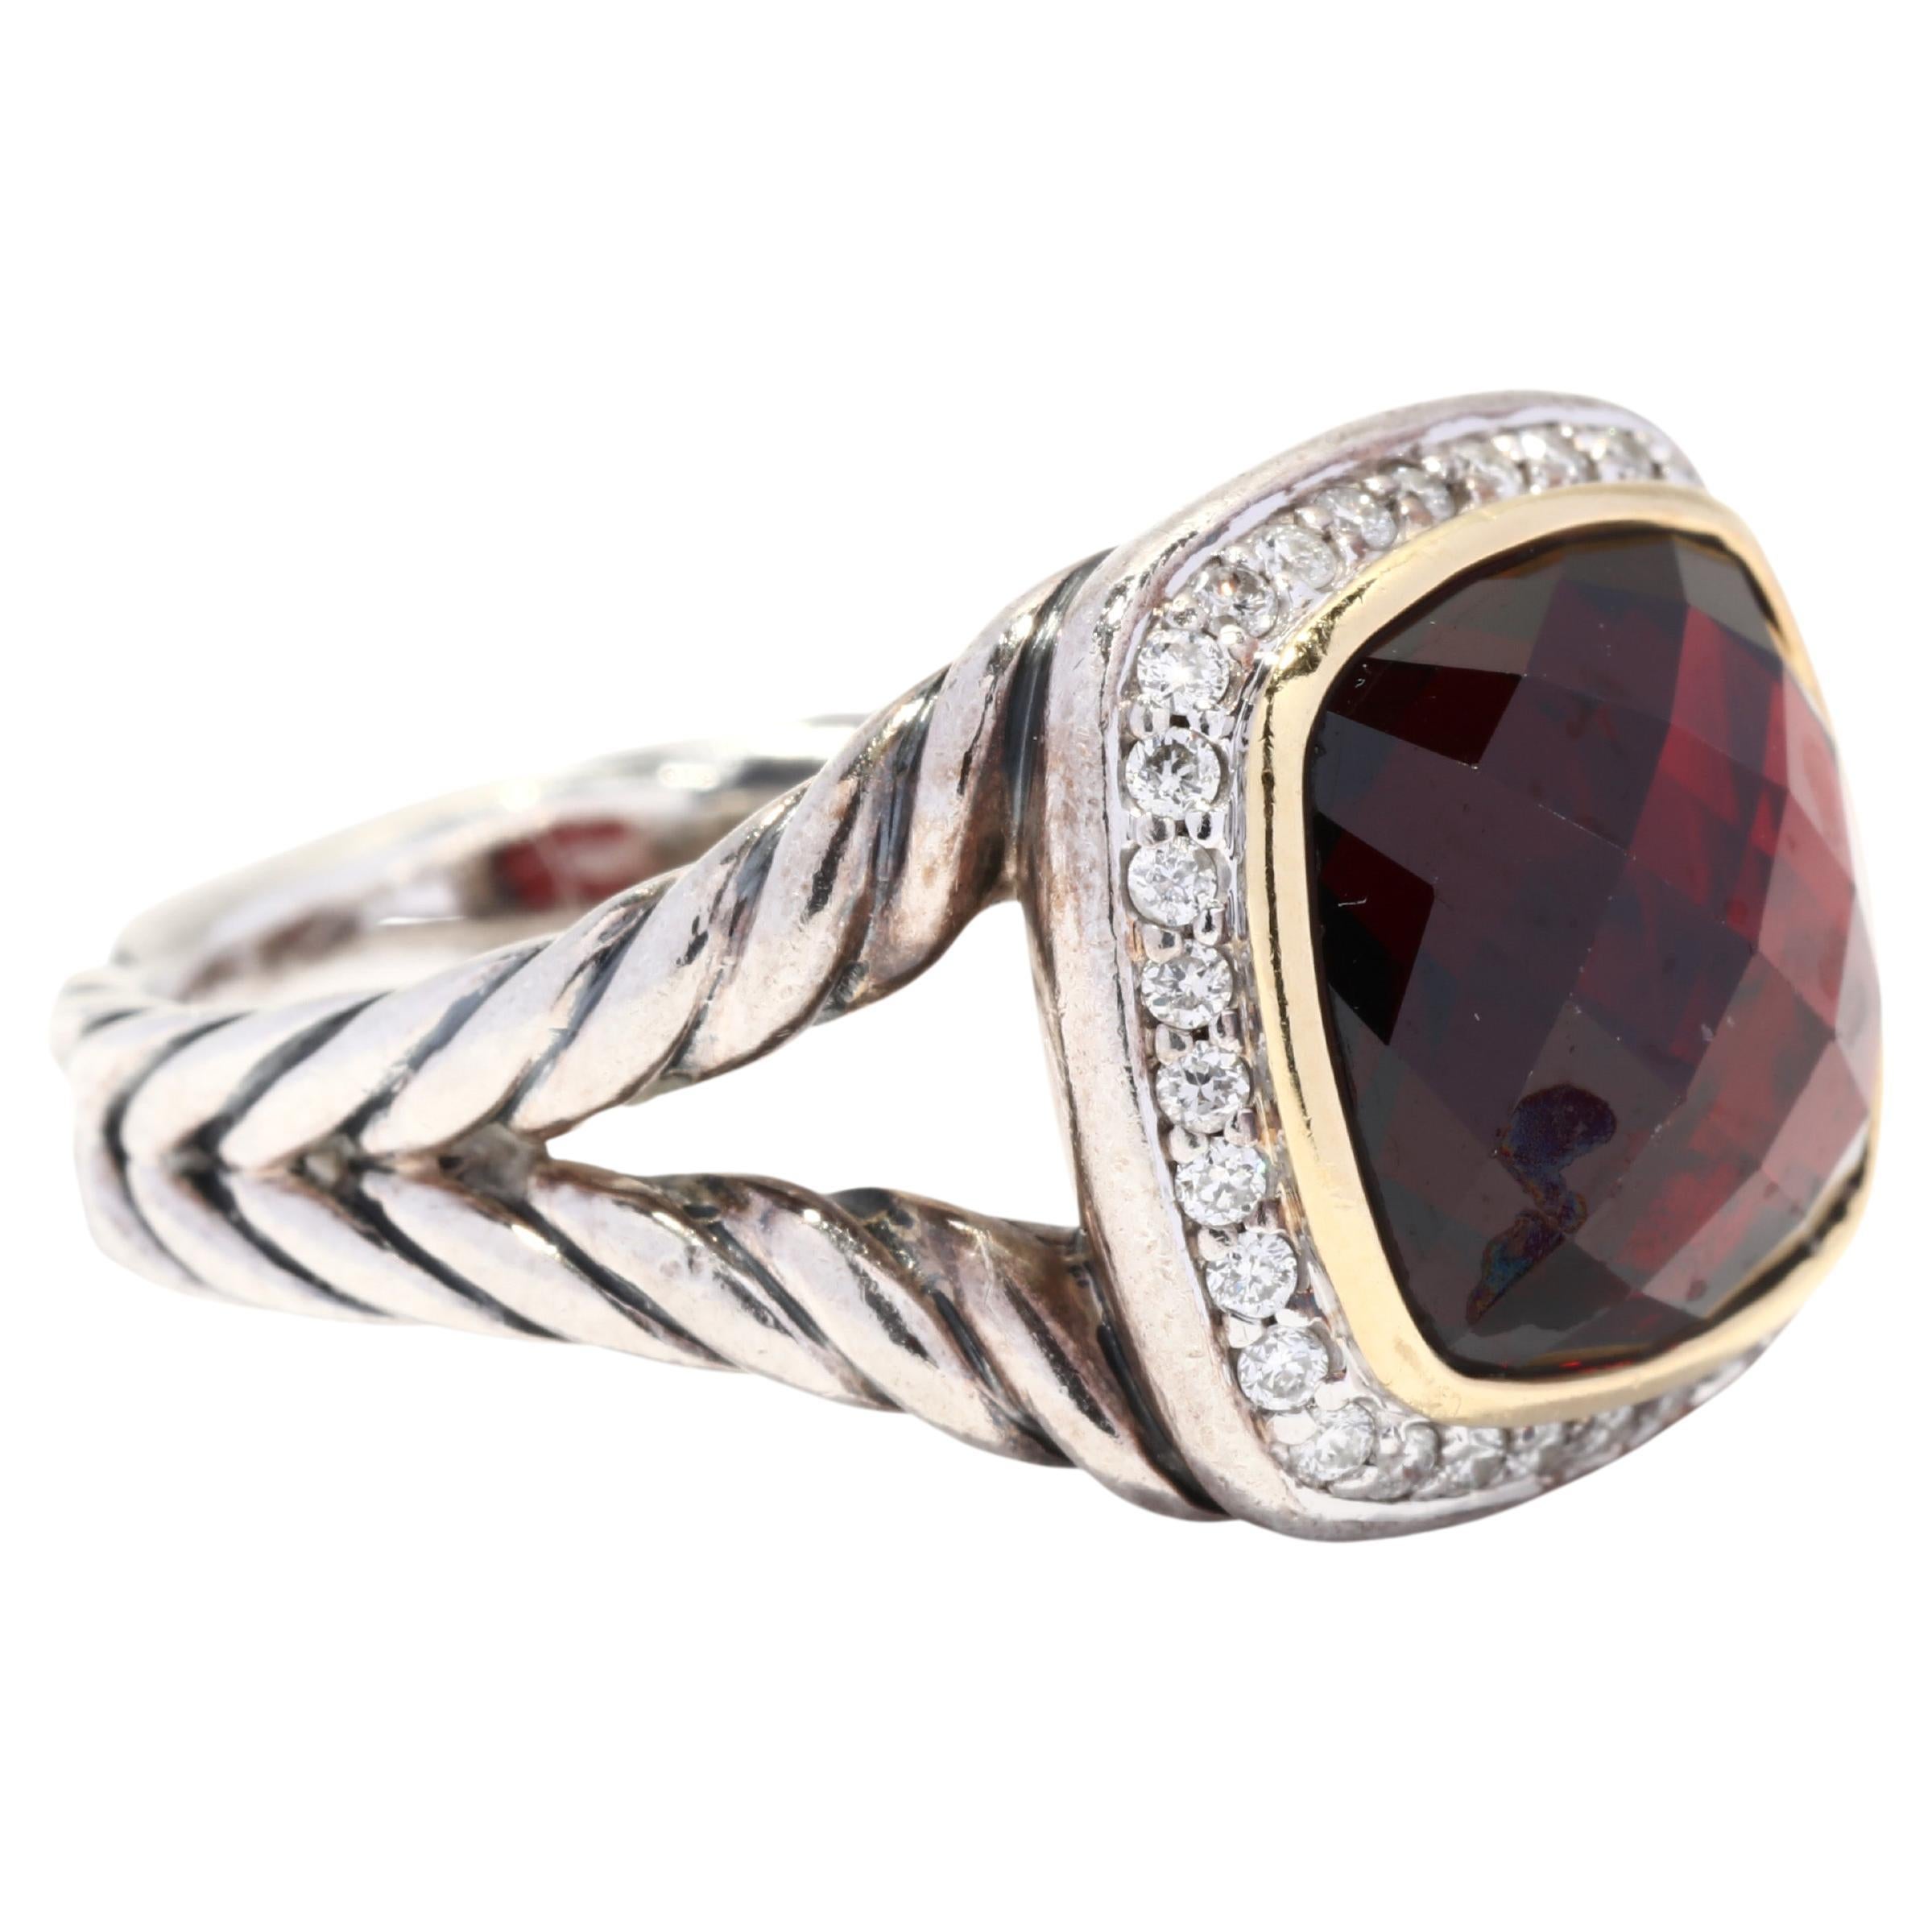 A vintage 18 karat yellow gold, sterling silver, garnet and diamond Albion ring designed by David Yurman. This medium size ring features a bezel set, checkerboard cushion cut garnet center stone surrounded by a halo of full cut round diamonds